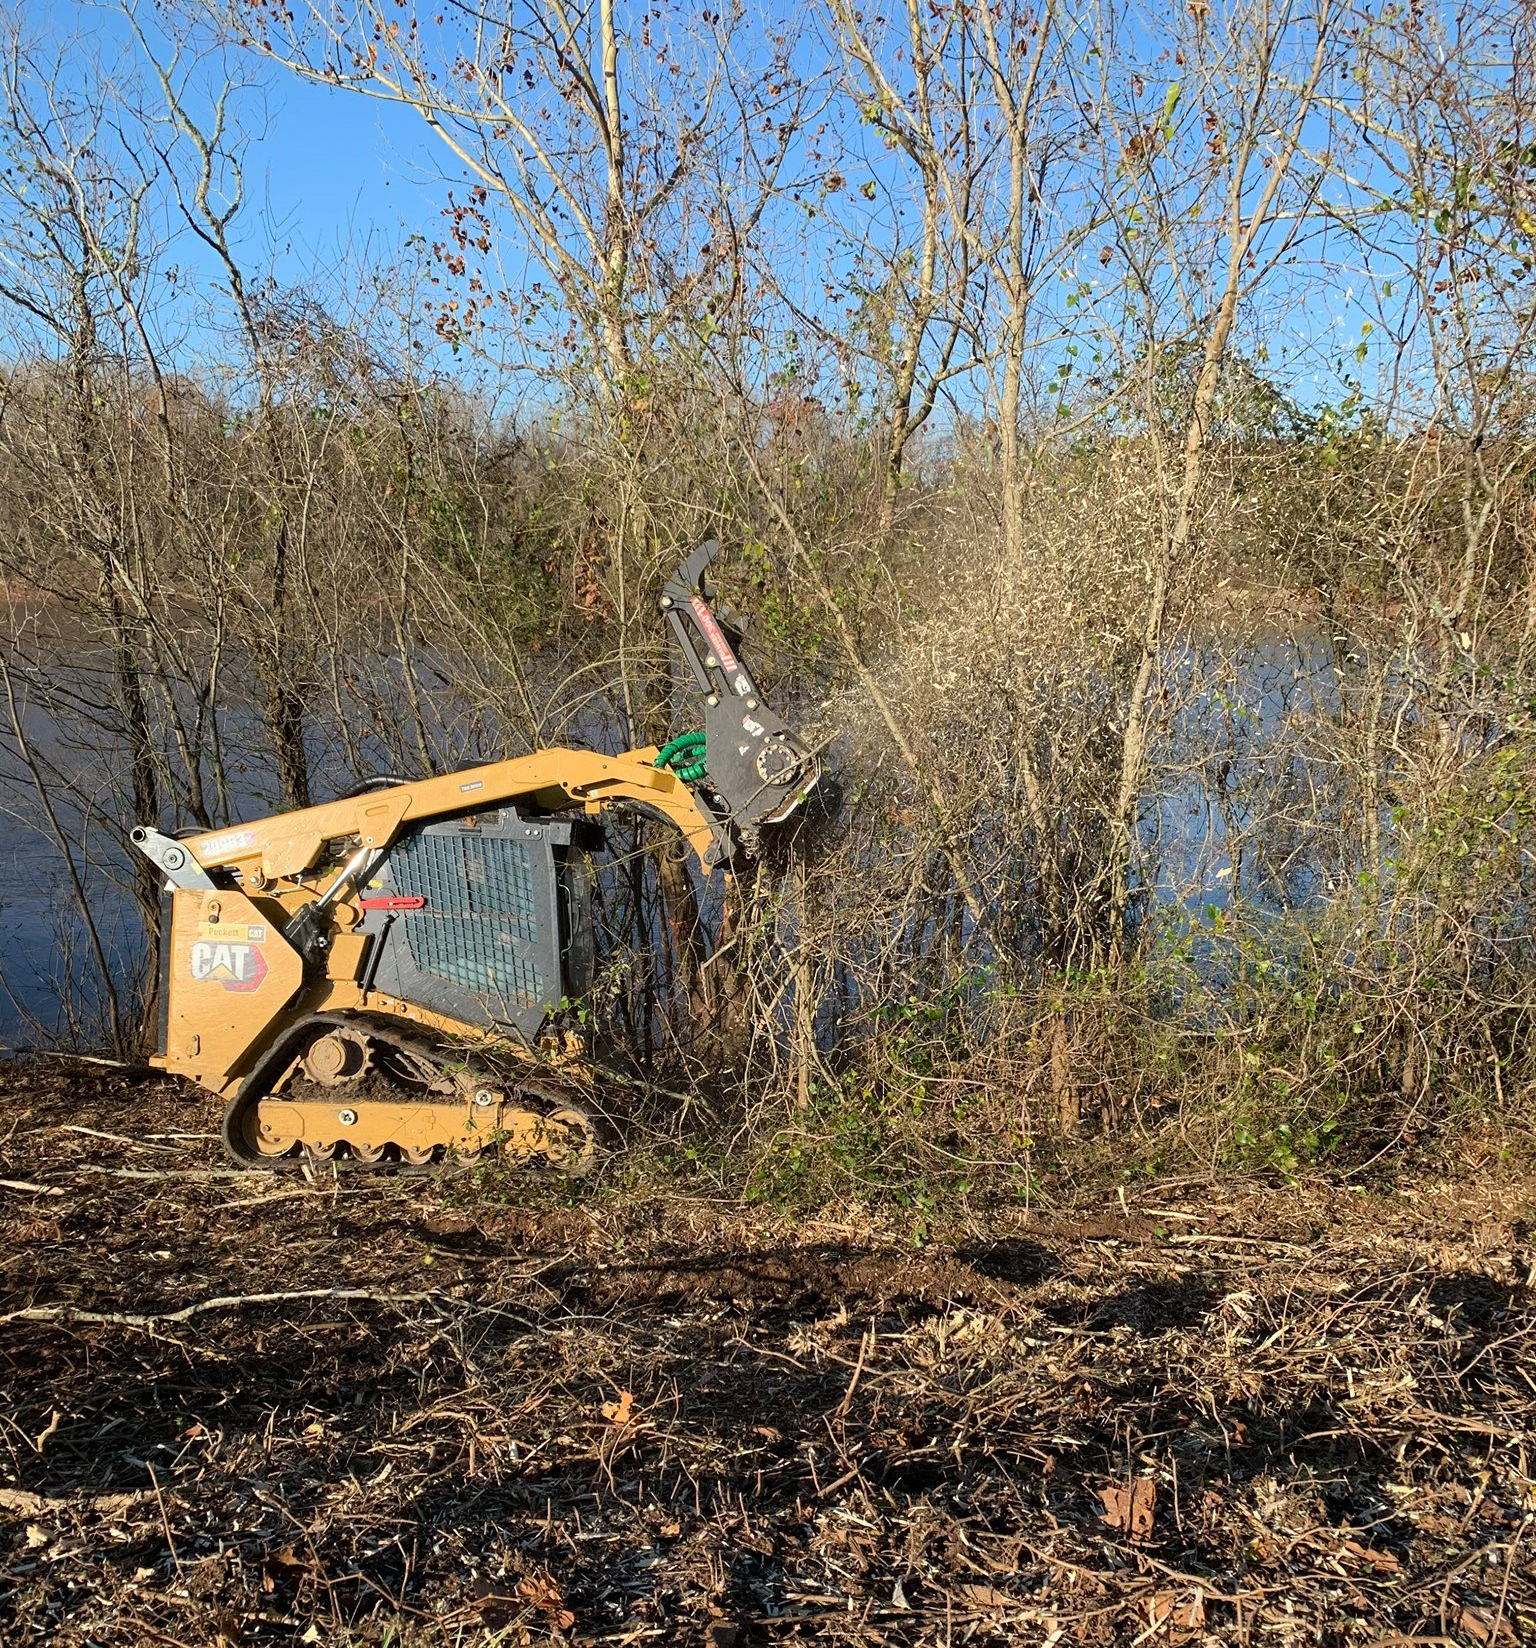 a cat tractor is clearing brush near a body of water